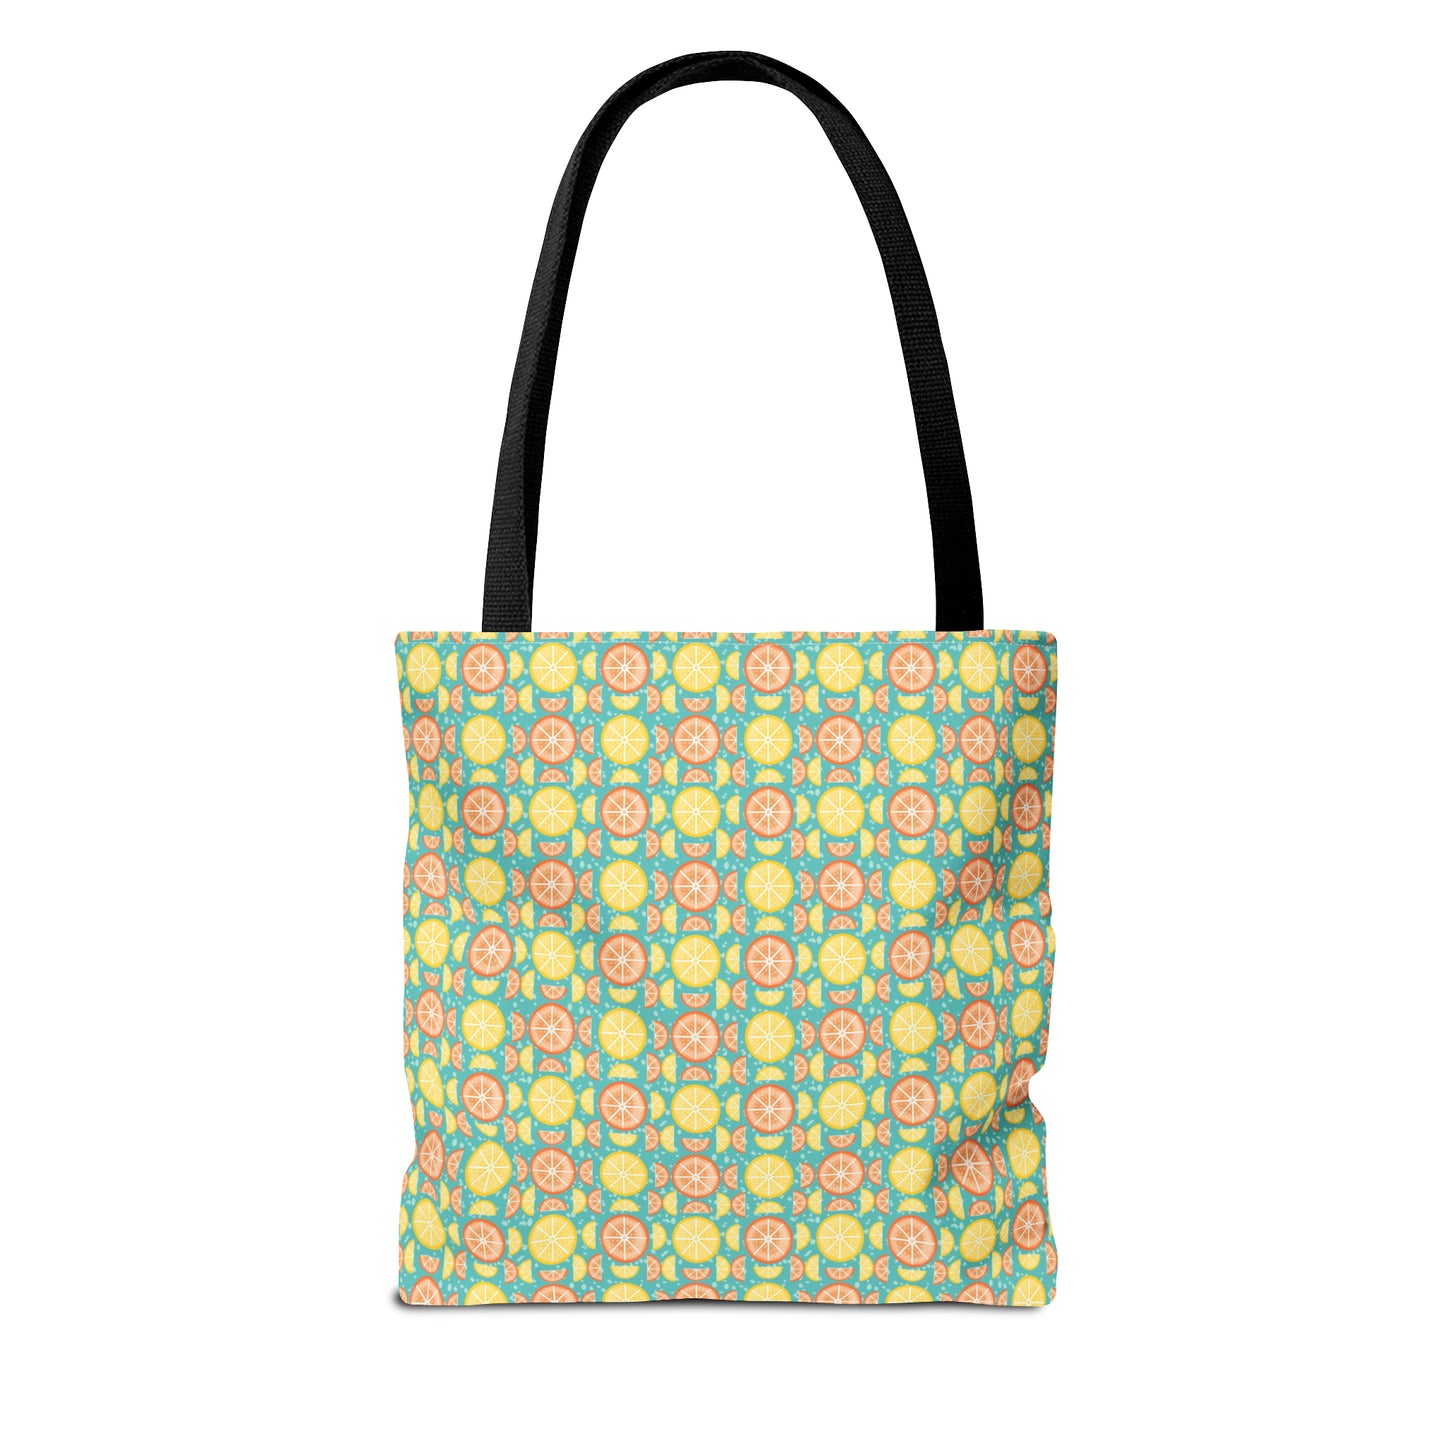 Citrus Slices Geometric Tote Bag - Carry Your Essentials in Style